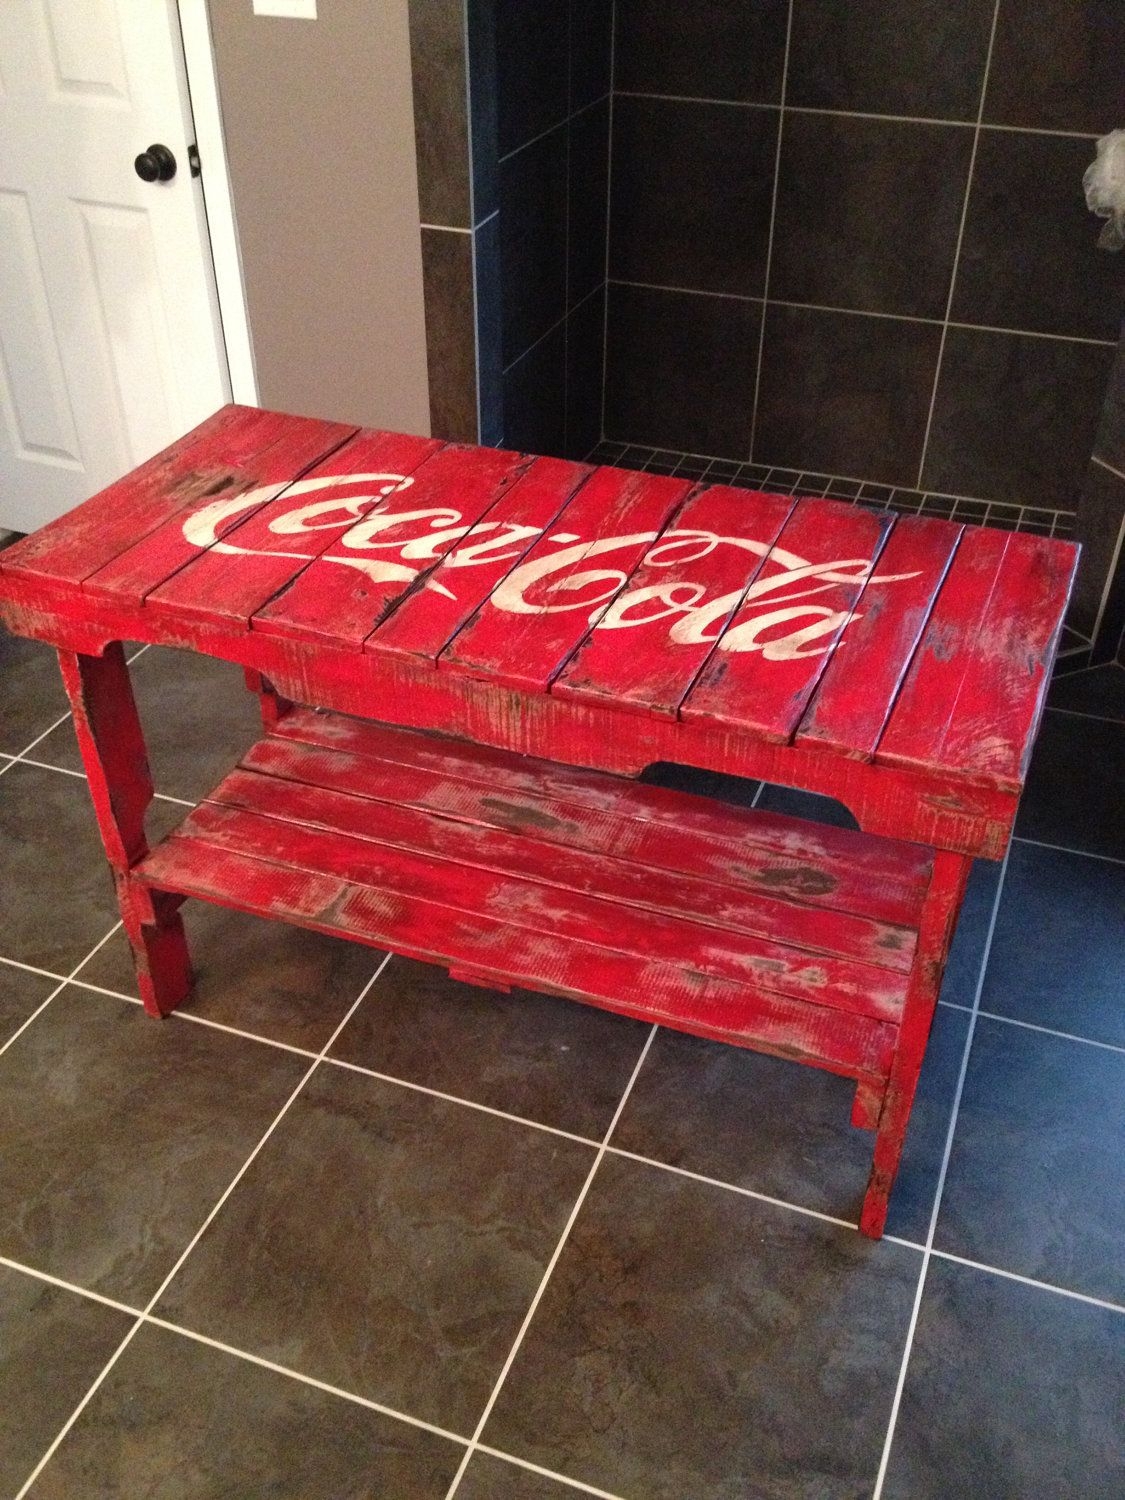 Distressed coca cola table made of